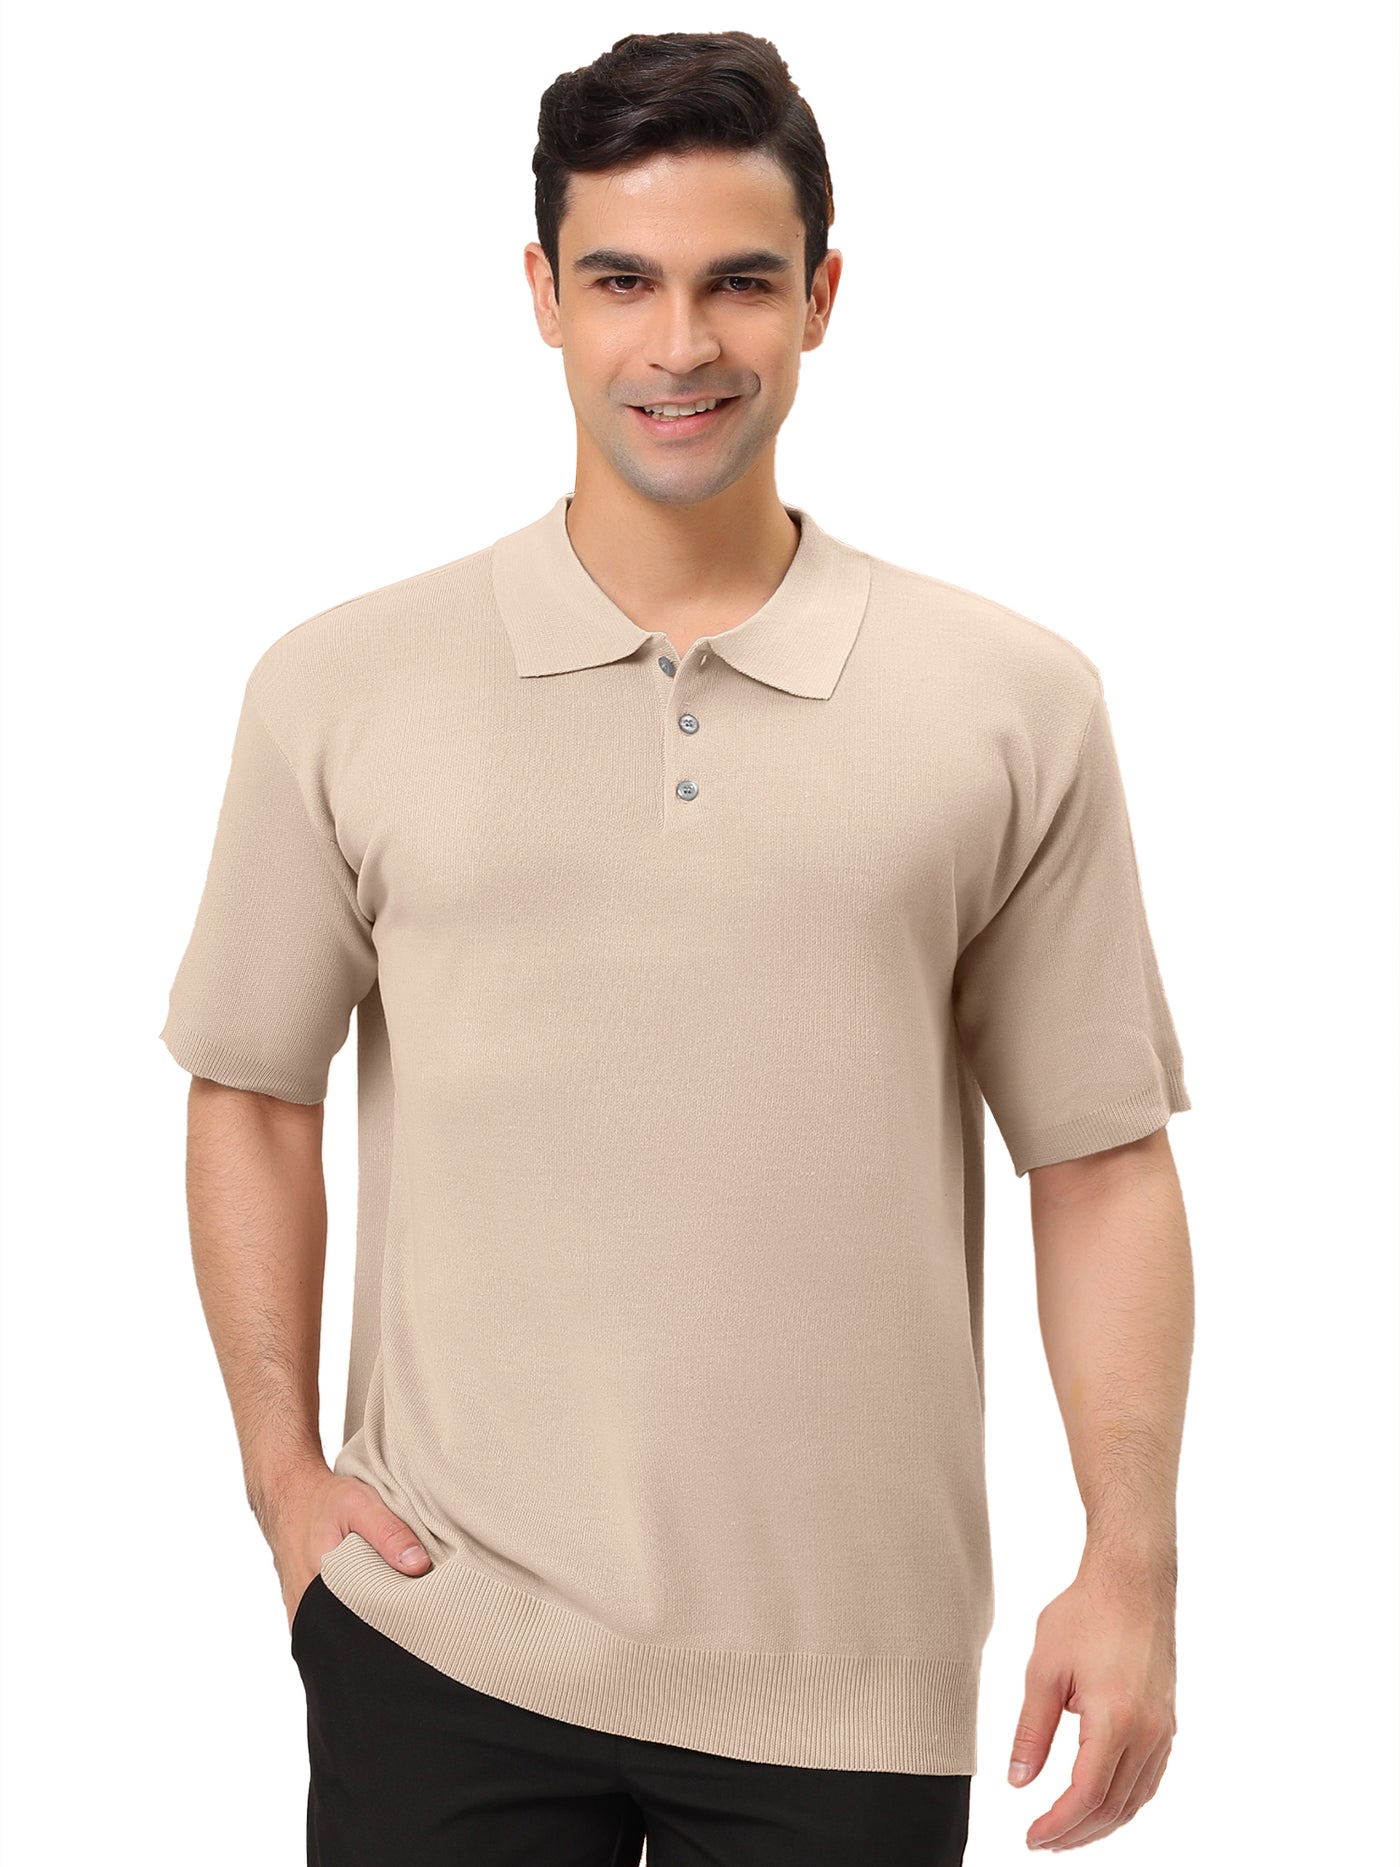 Bublédon Polo Shirts Short Sleeves Solid Color Knitted Sports